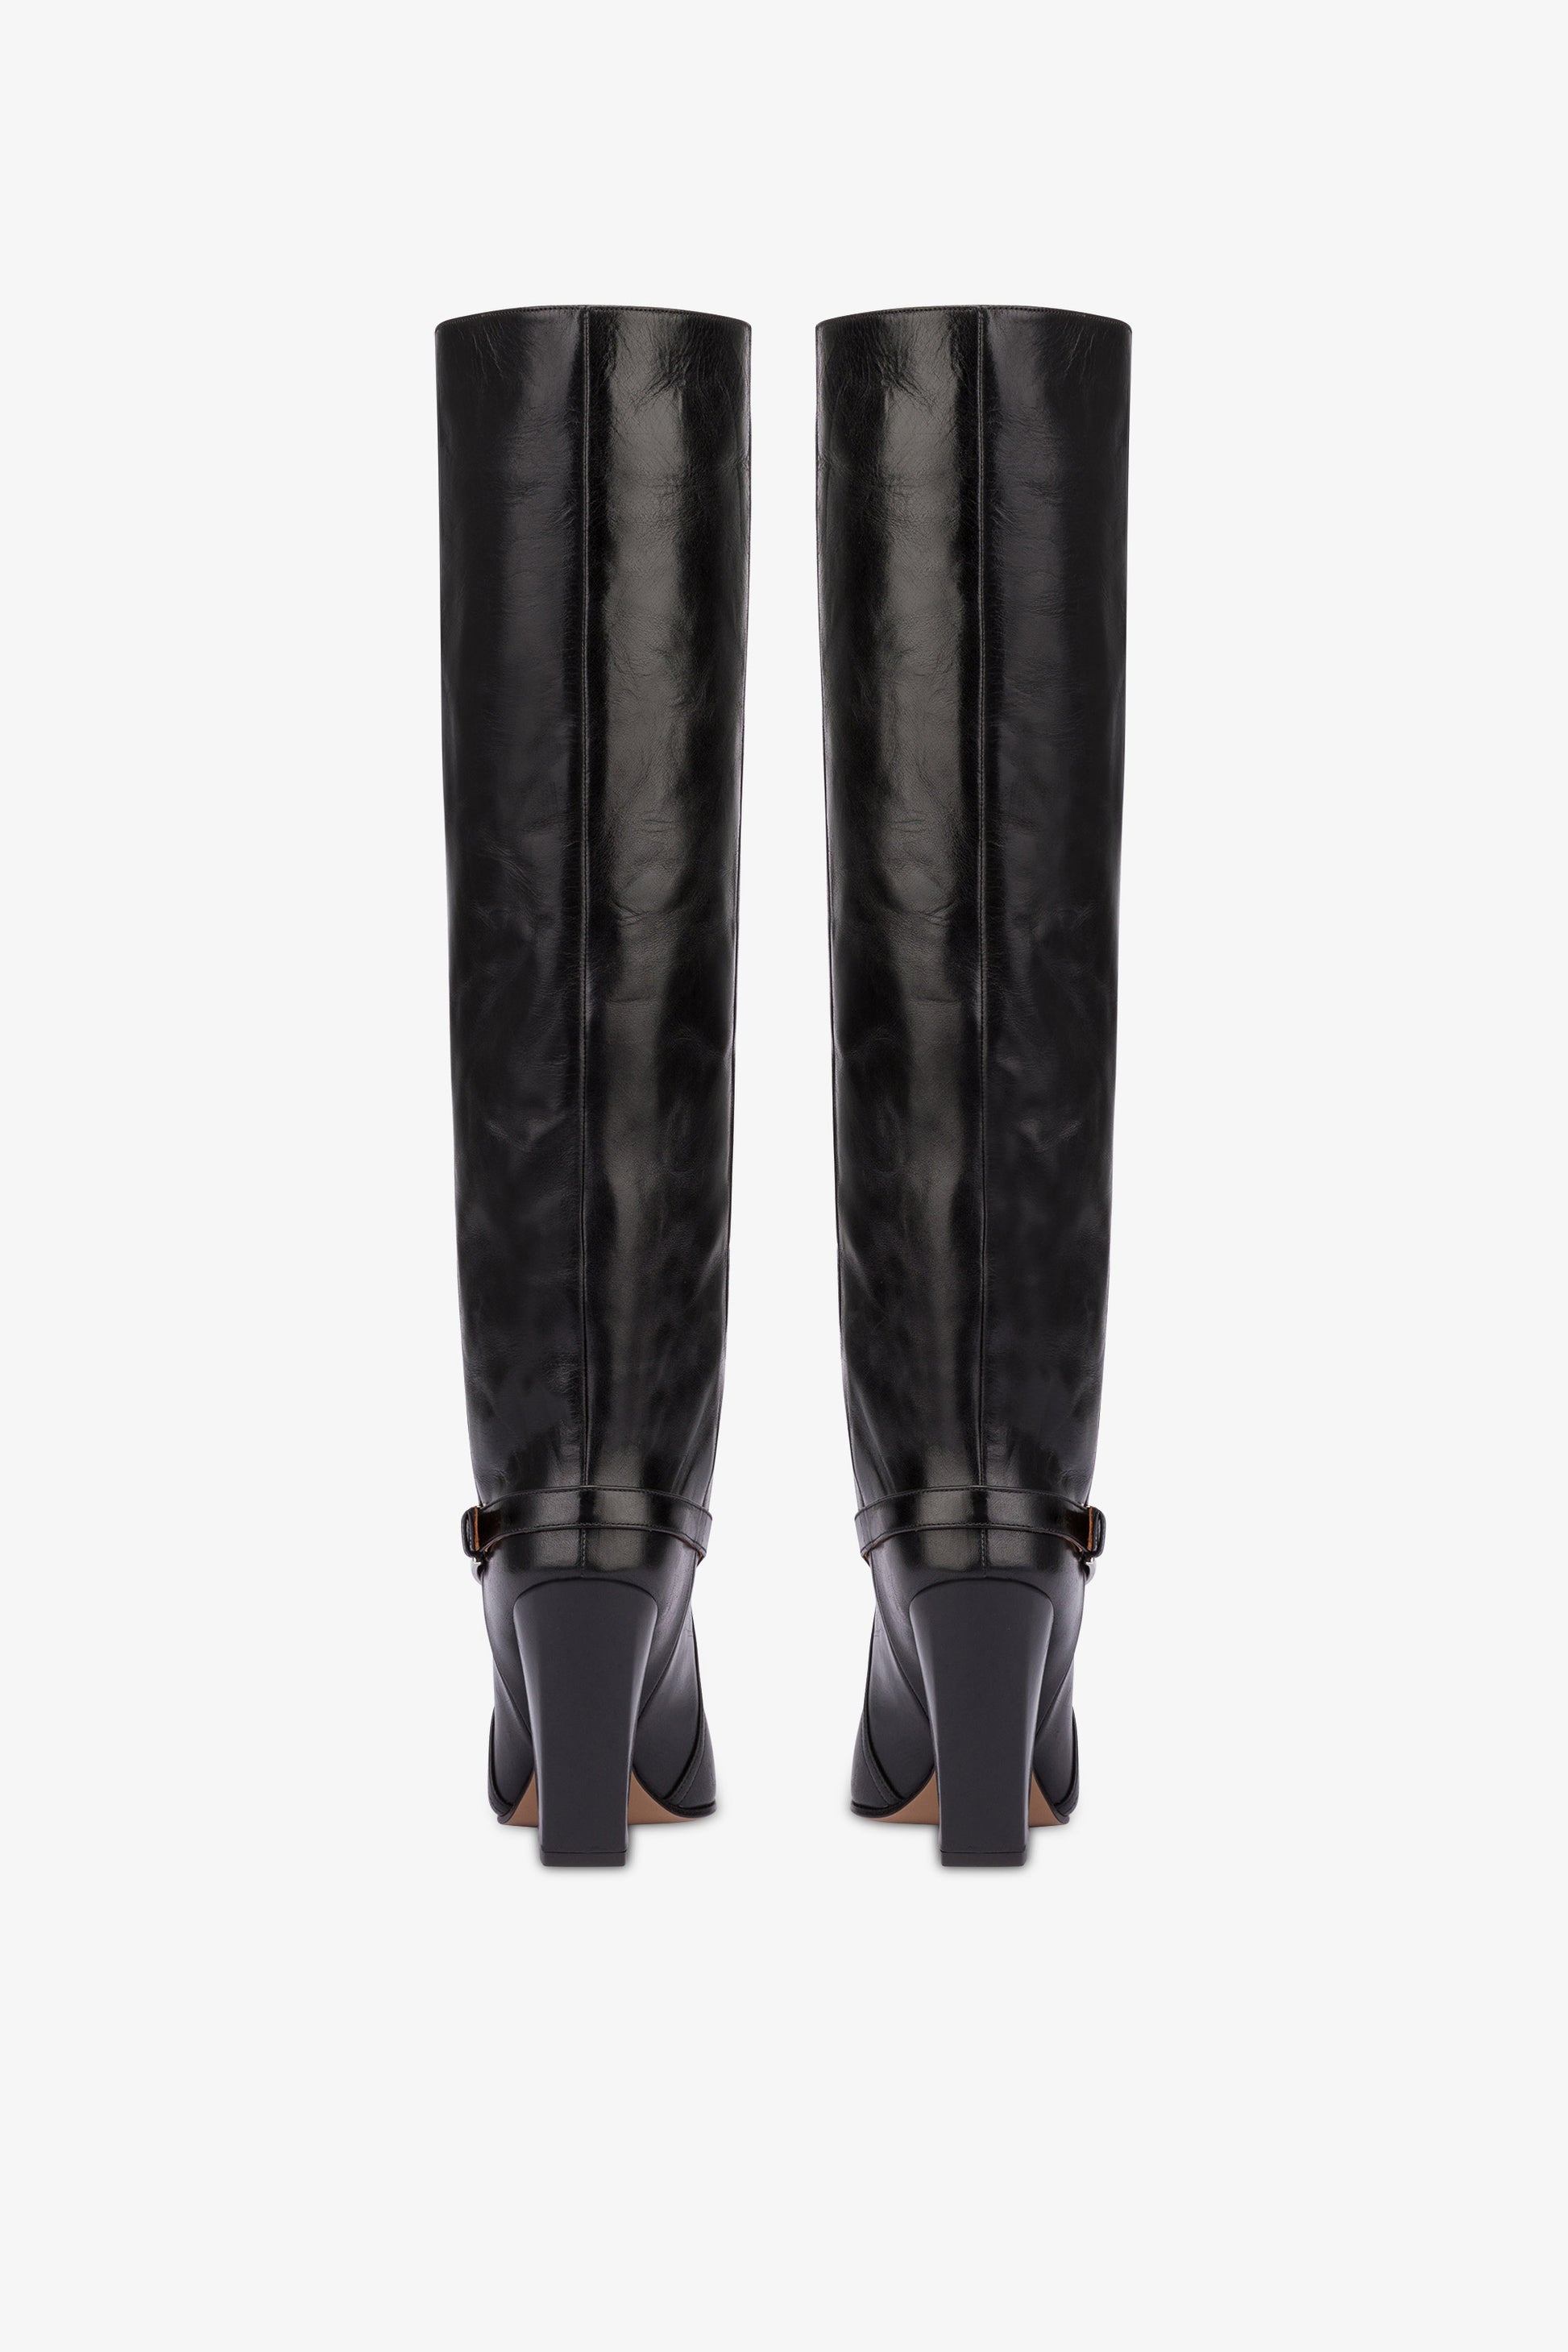 Tall, knee-high boots in shiny black vintage leather